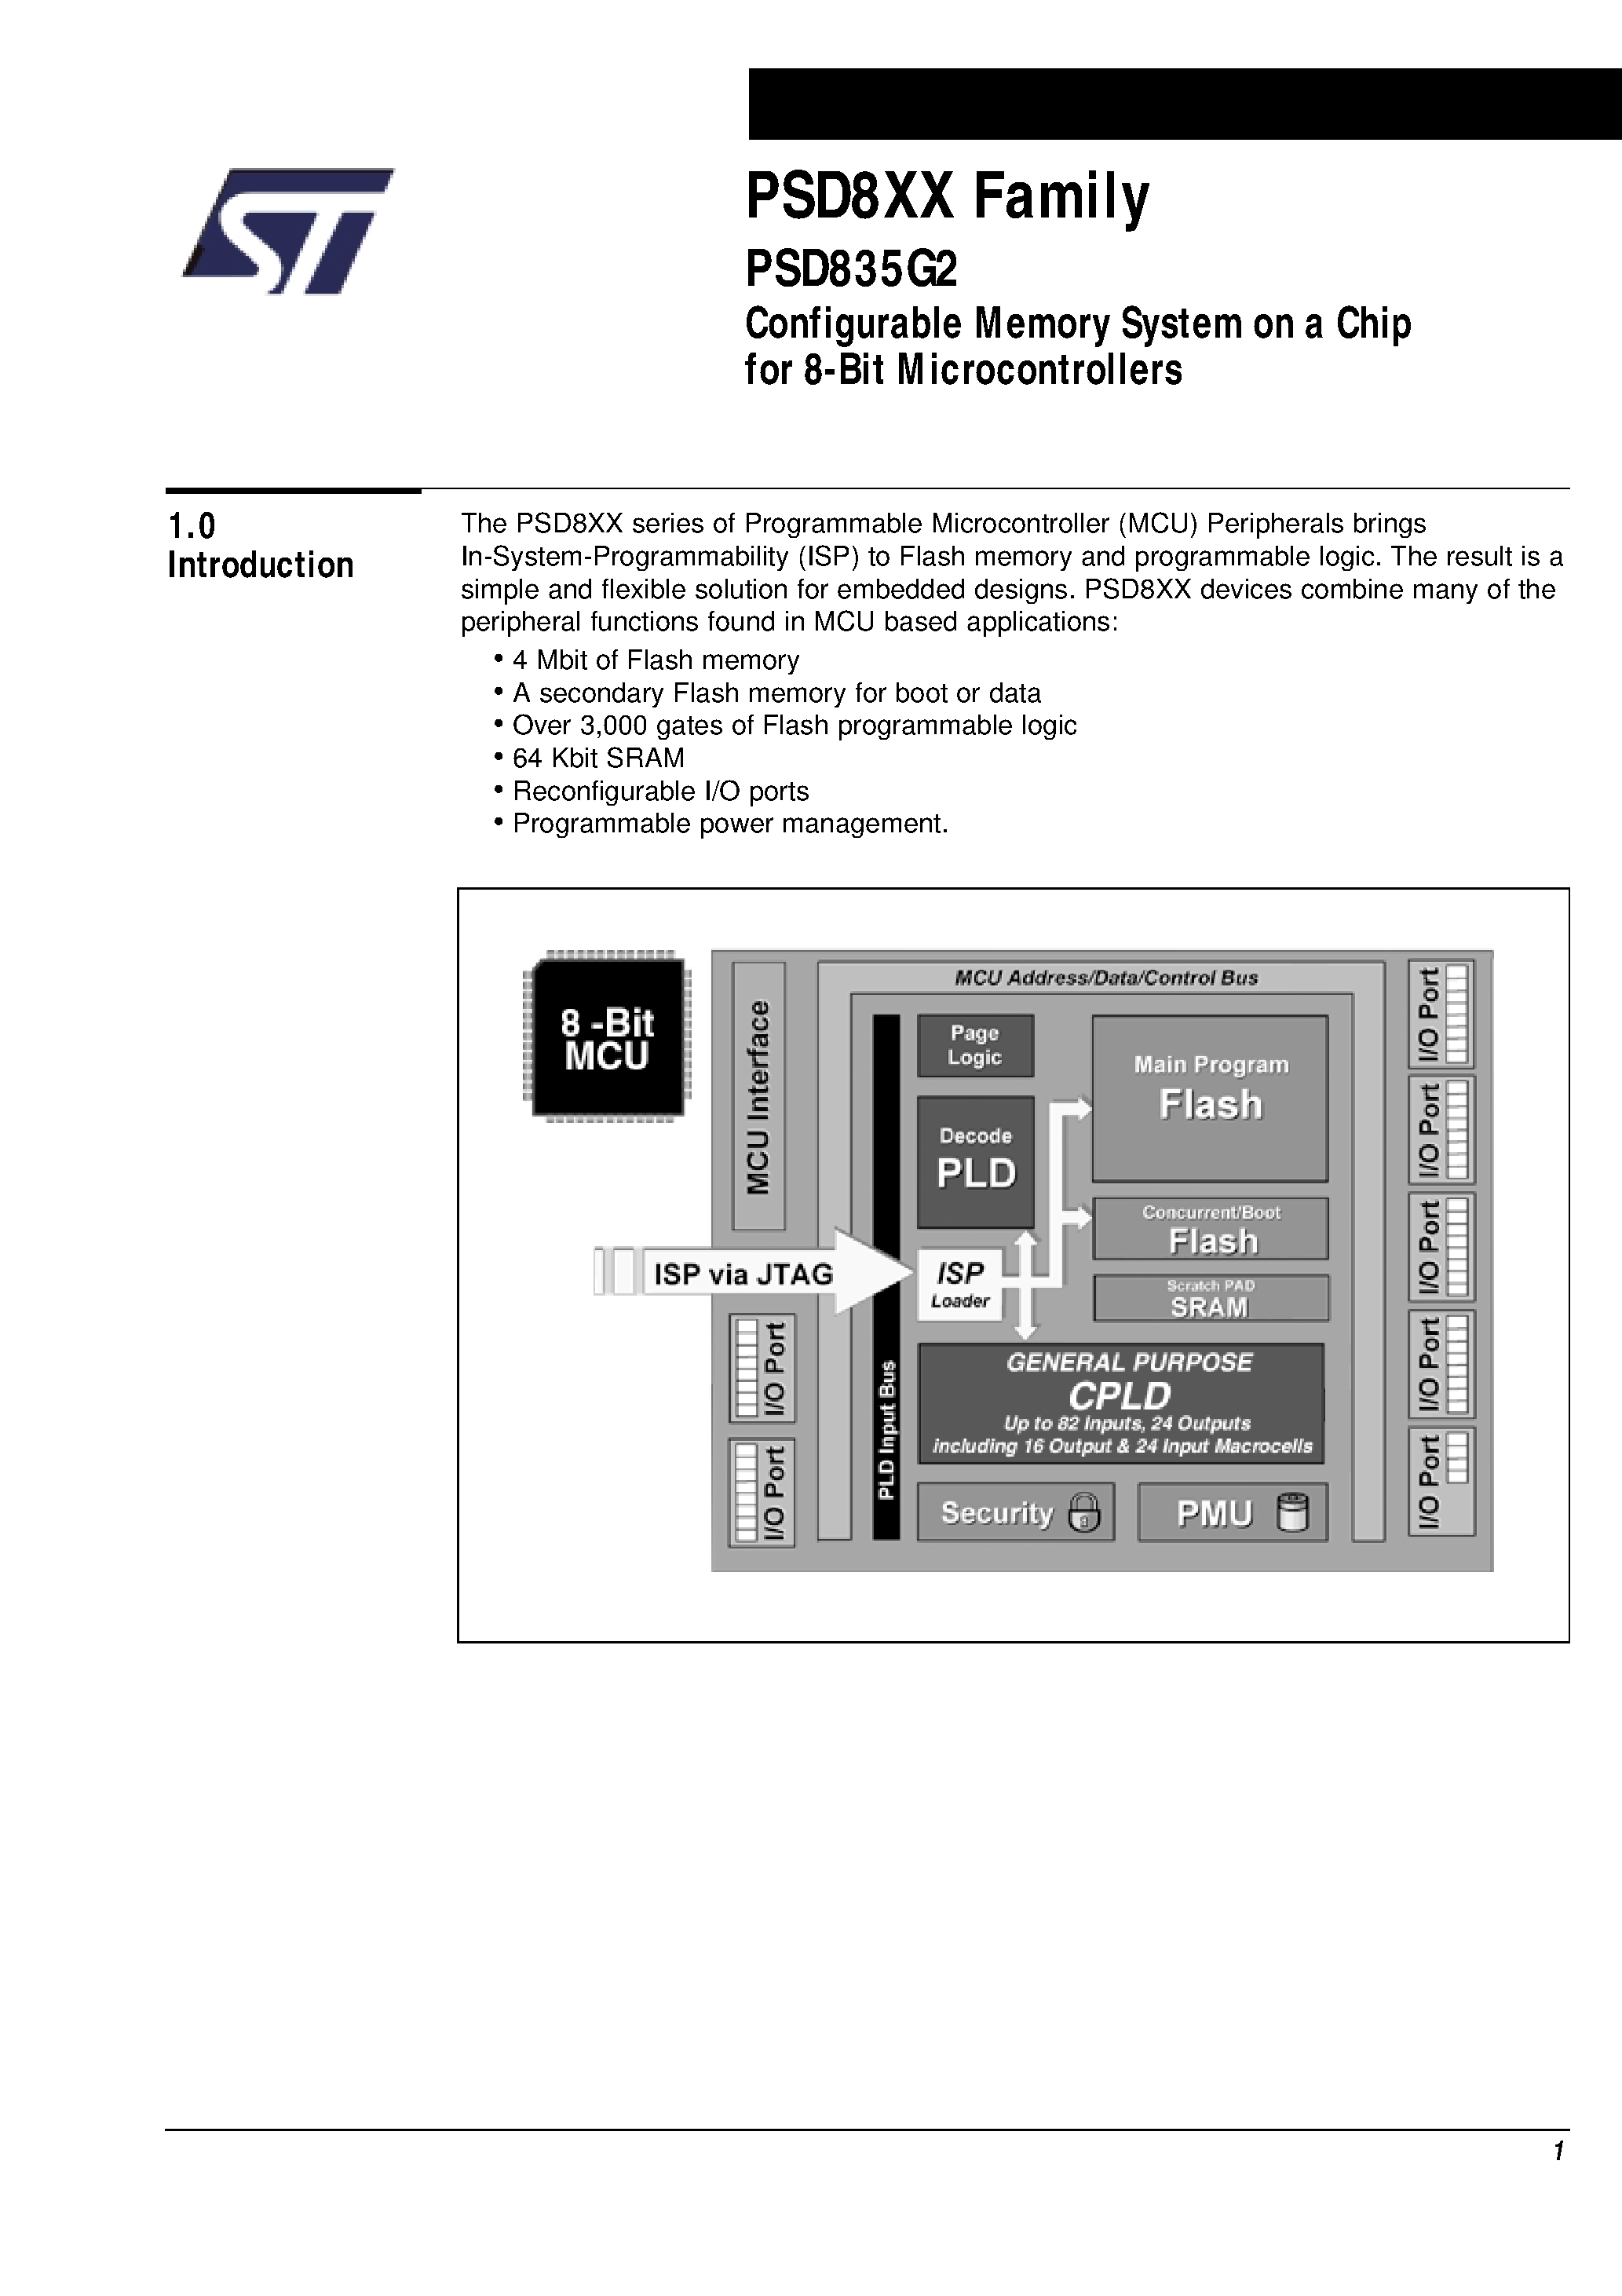 Datasheet PSD835F1V-A-90MI - Configurable Memory System on a Chip for 8-Bit Microcontrollers page 2